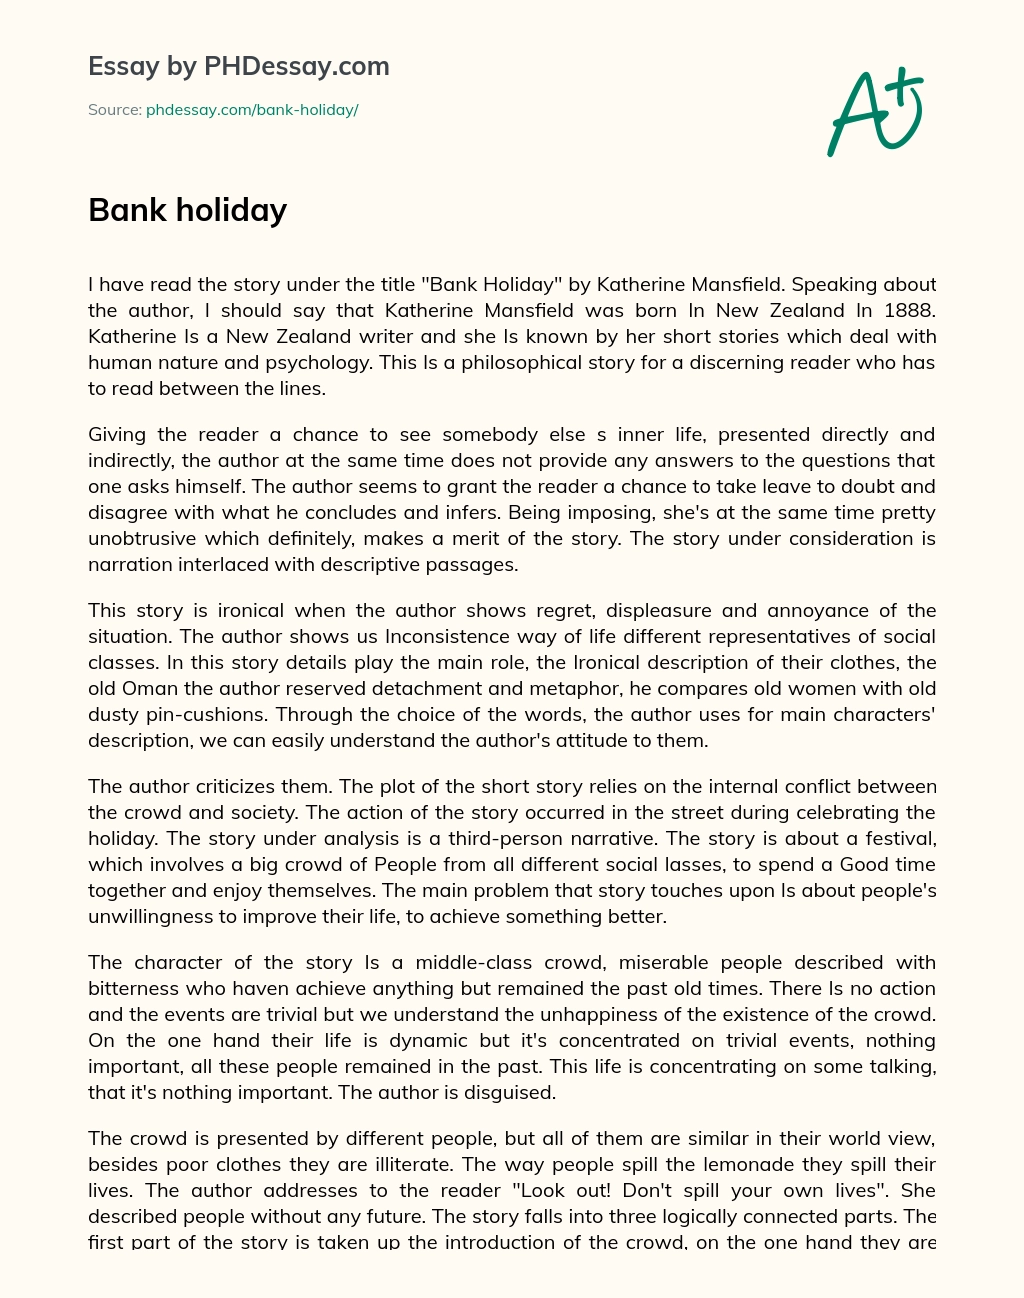 Analysis of Katherine Mansfield’s ‘Bank Holiday’ Short Story essay